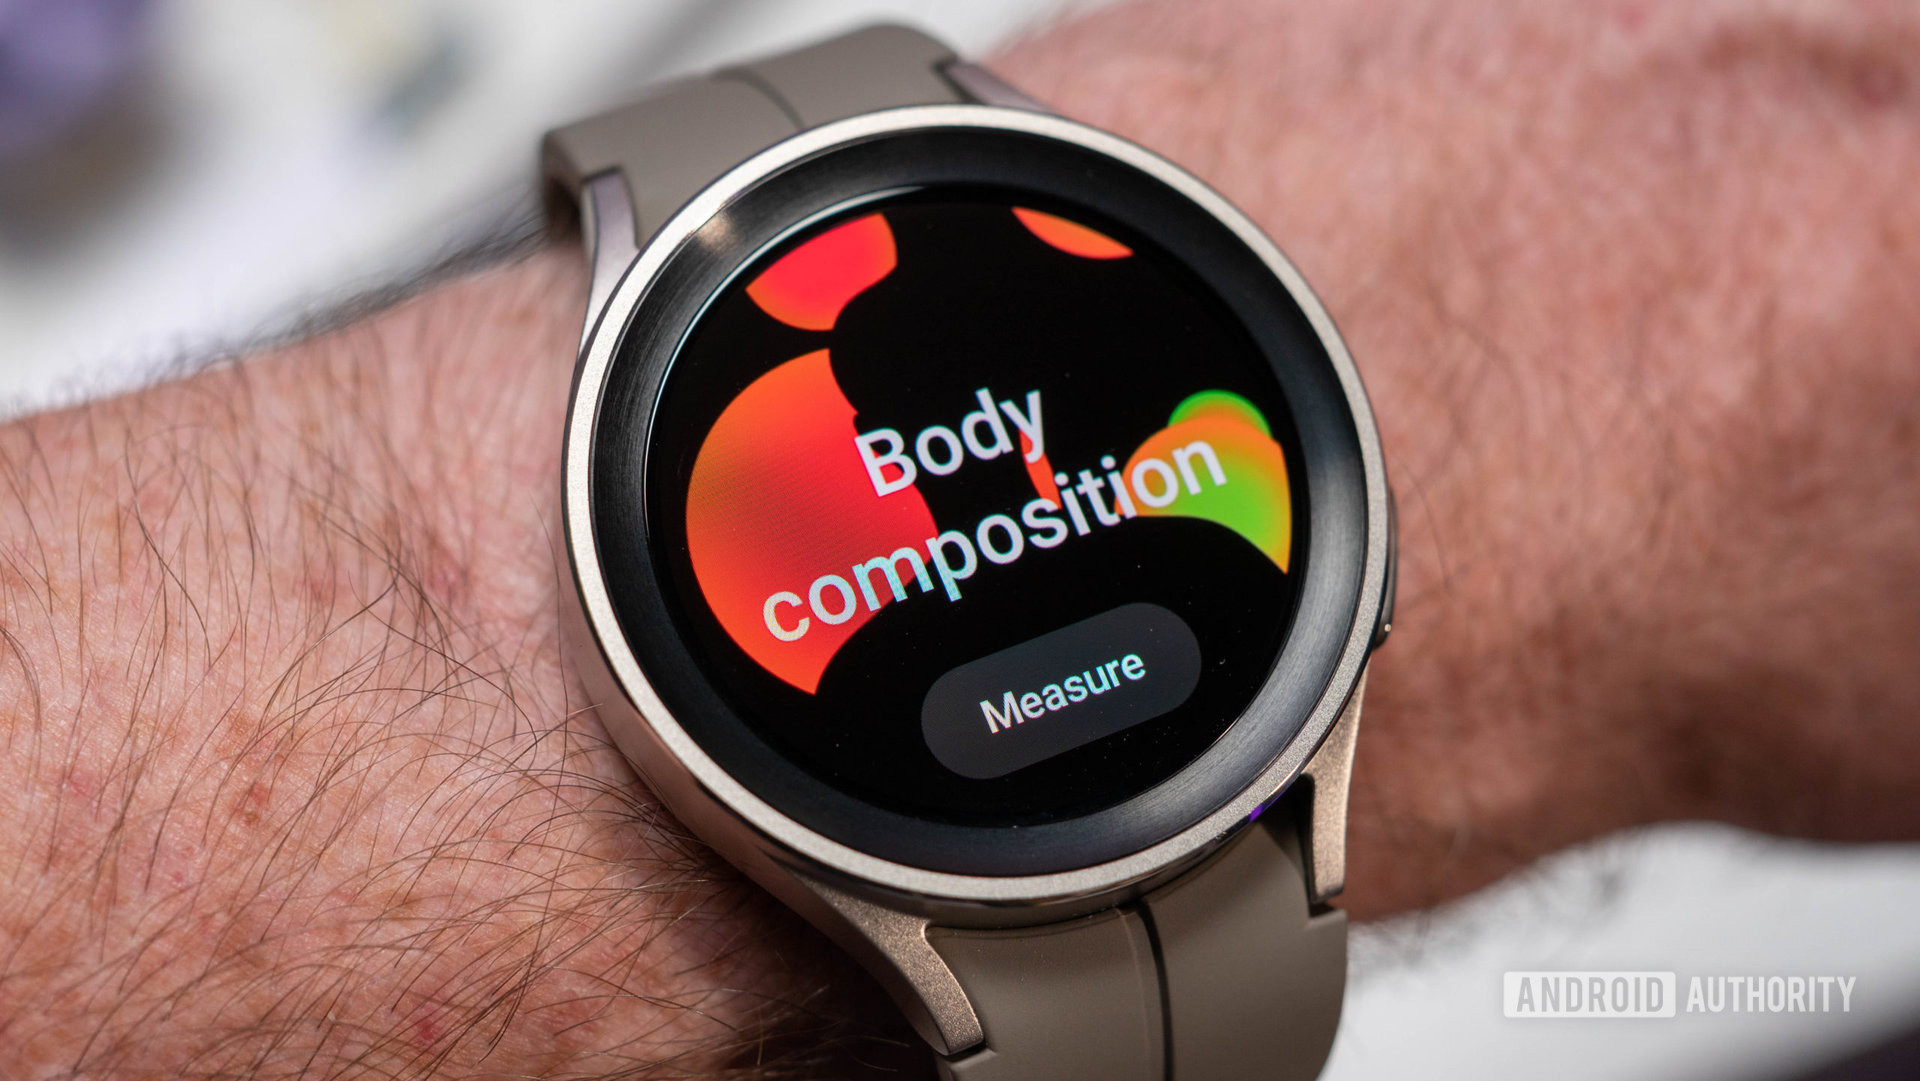 Samsung Galaxy Watch 5 Pro in silver color with fluoroelastomer wrist strap showing body composition screen